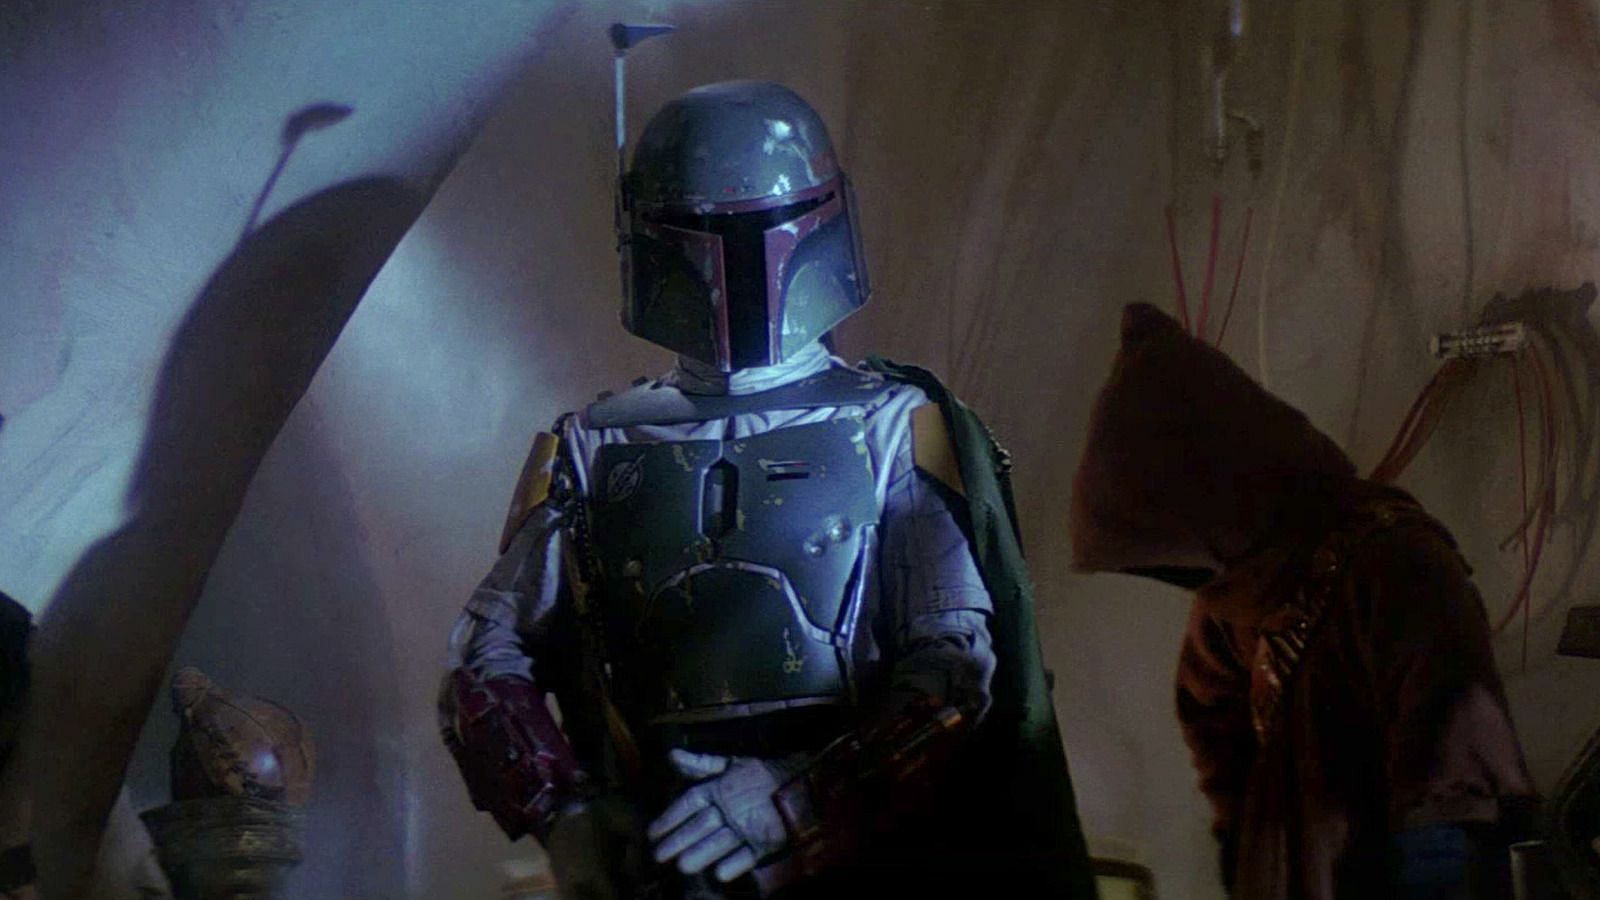 Despite his limited screen time, Boba Fett has become a fan favorite character (Image via Lucasfilm)